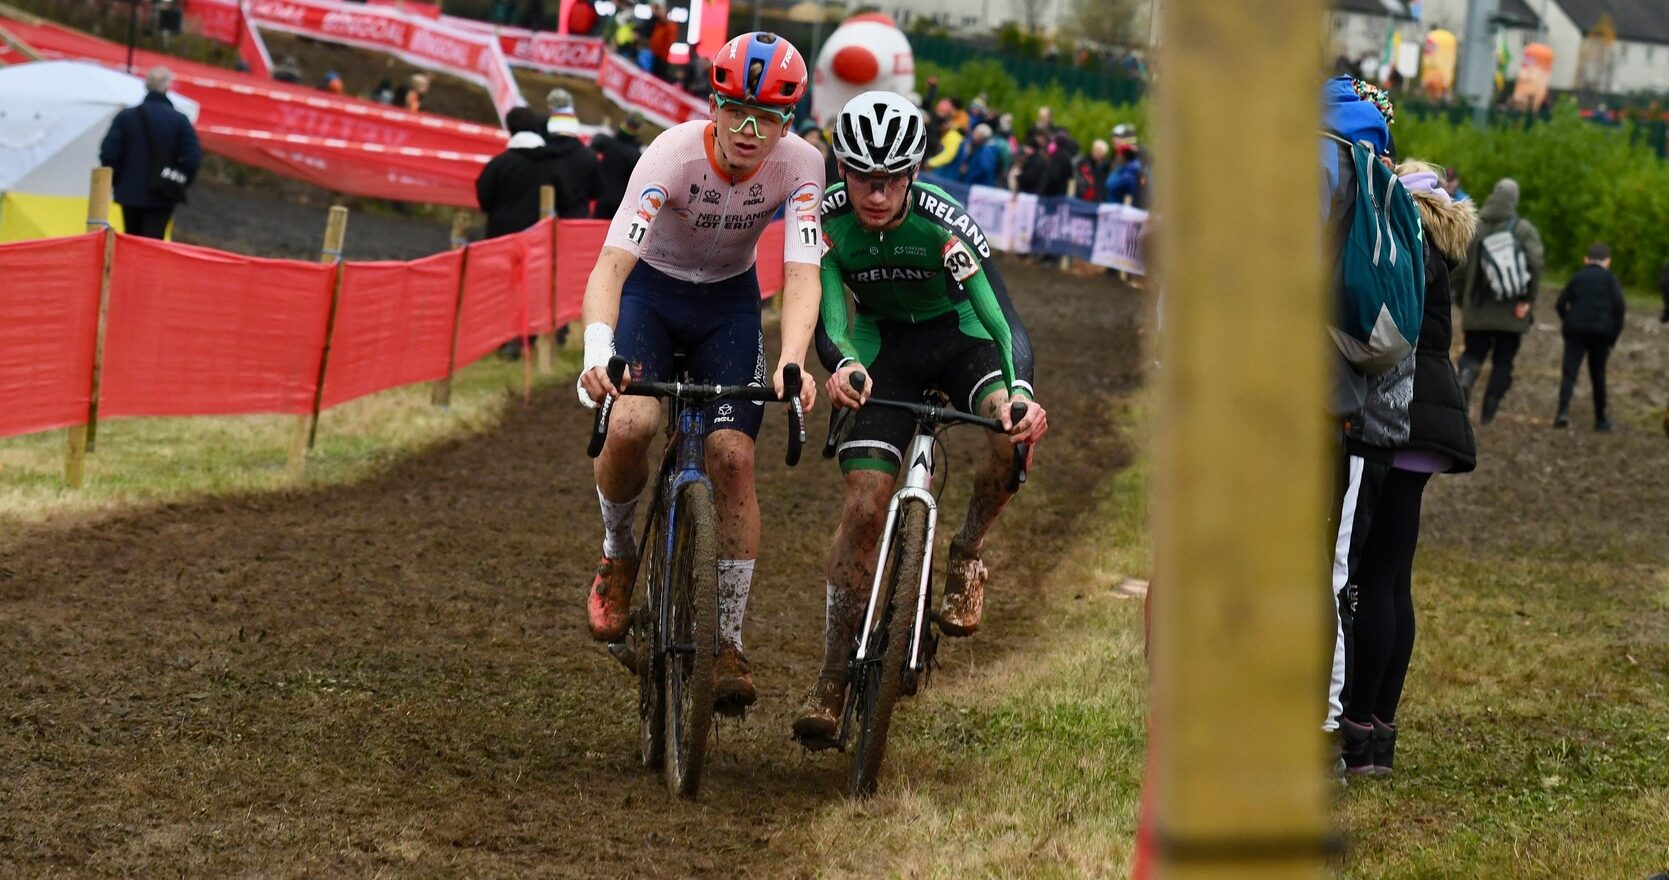 Selection open for Irish team at cyclocross Worlds, “high level” criteria